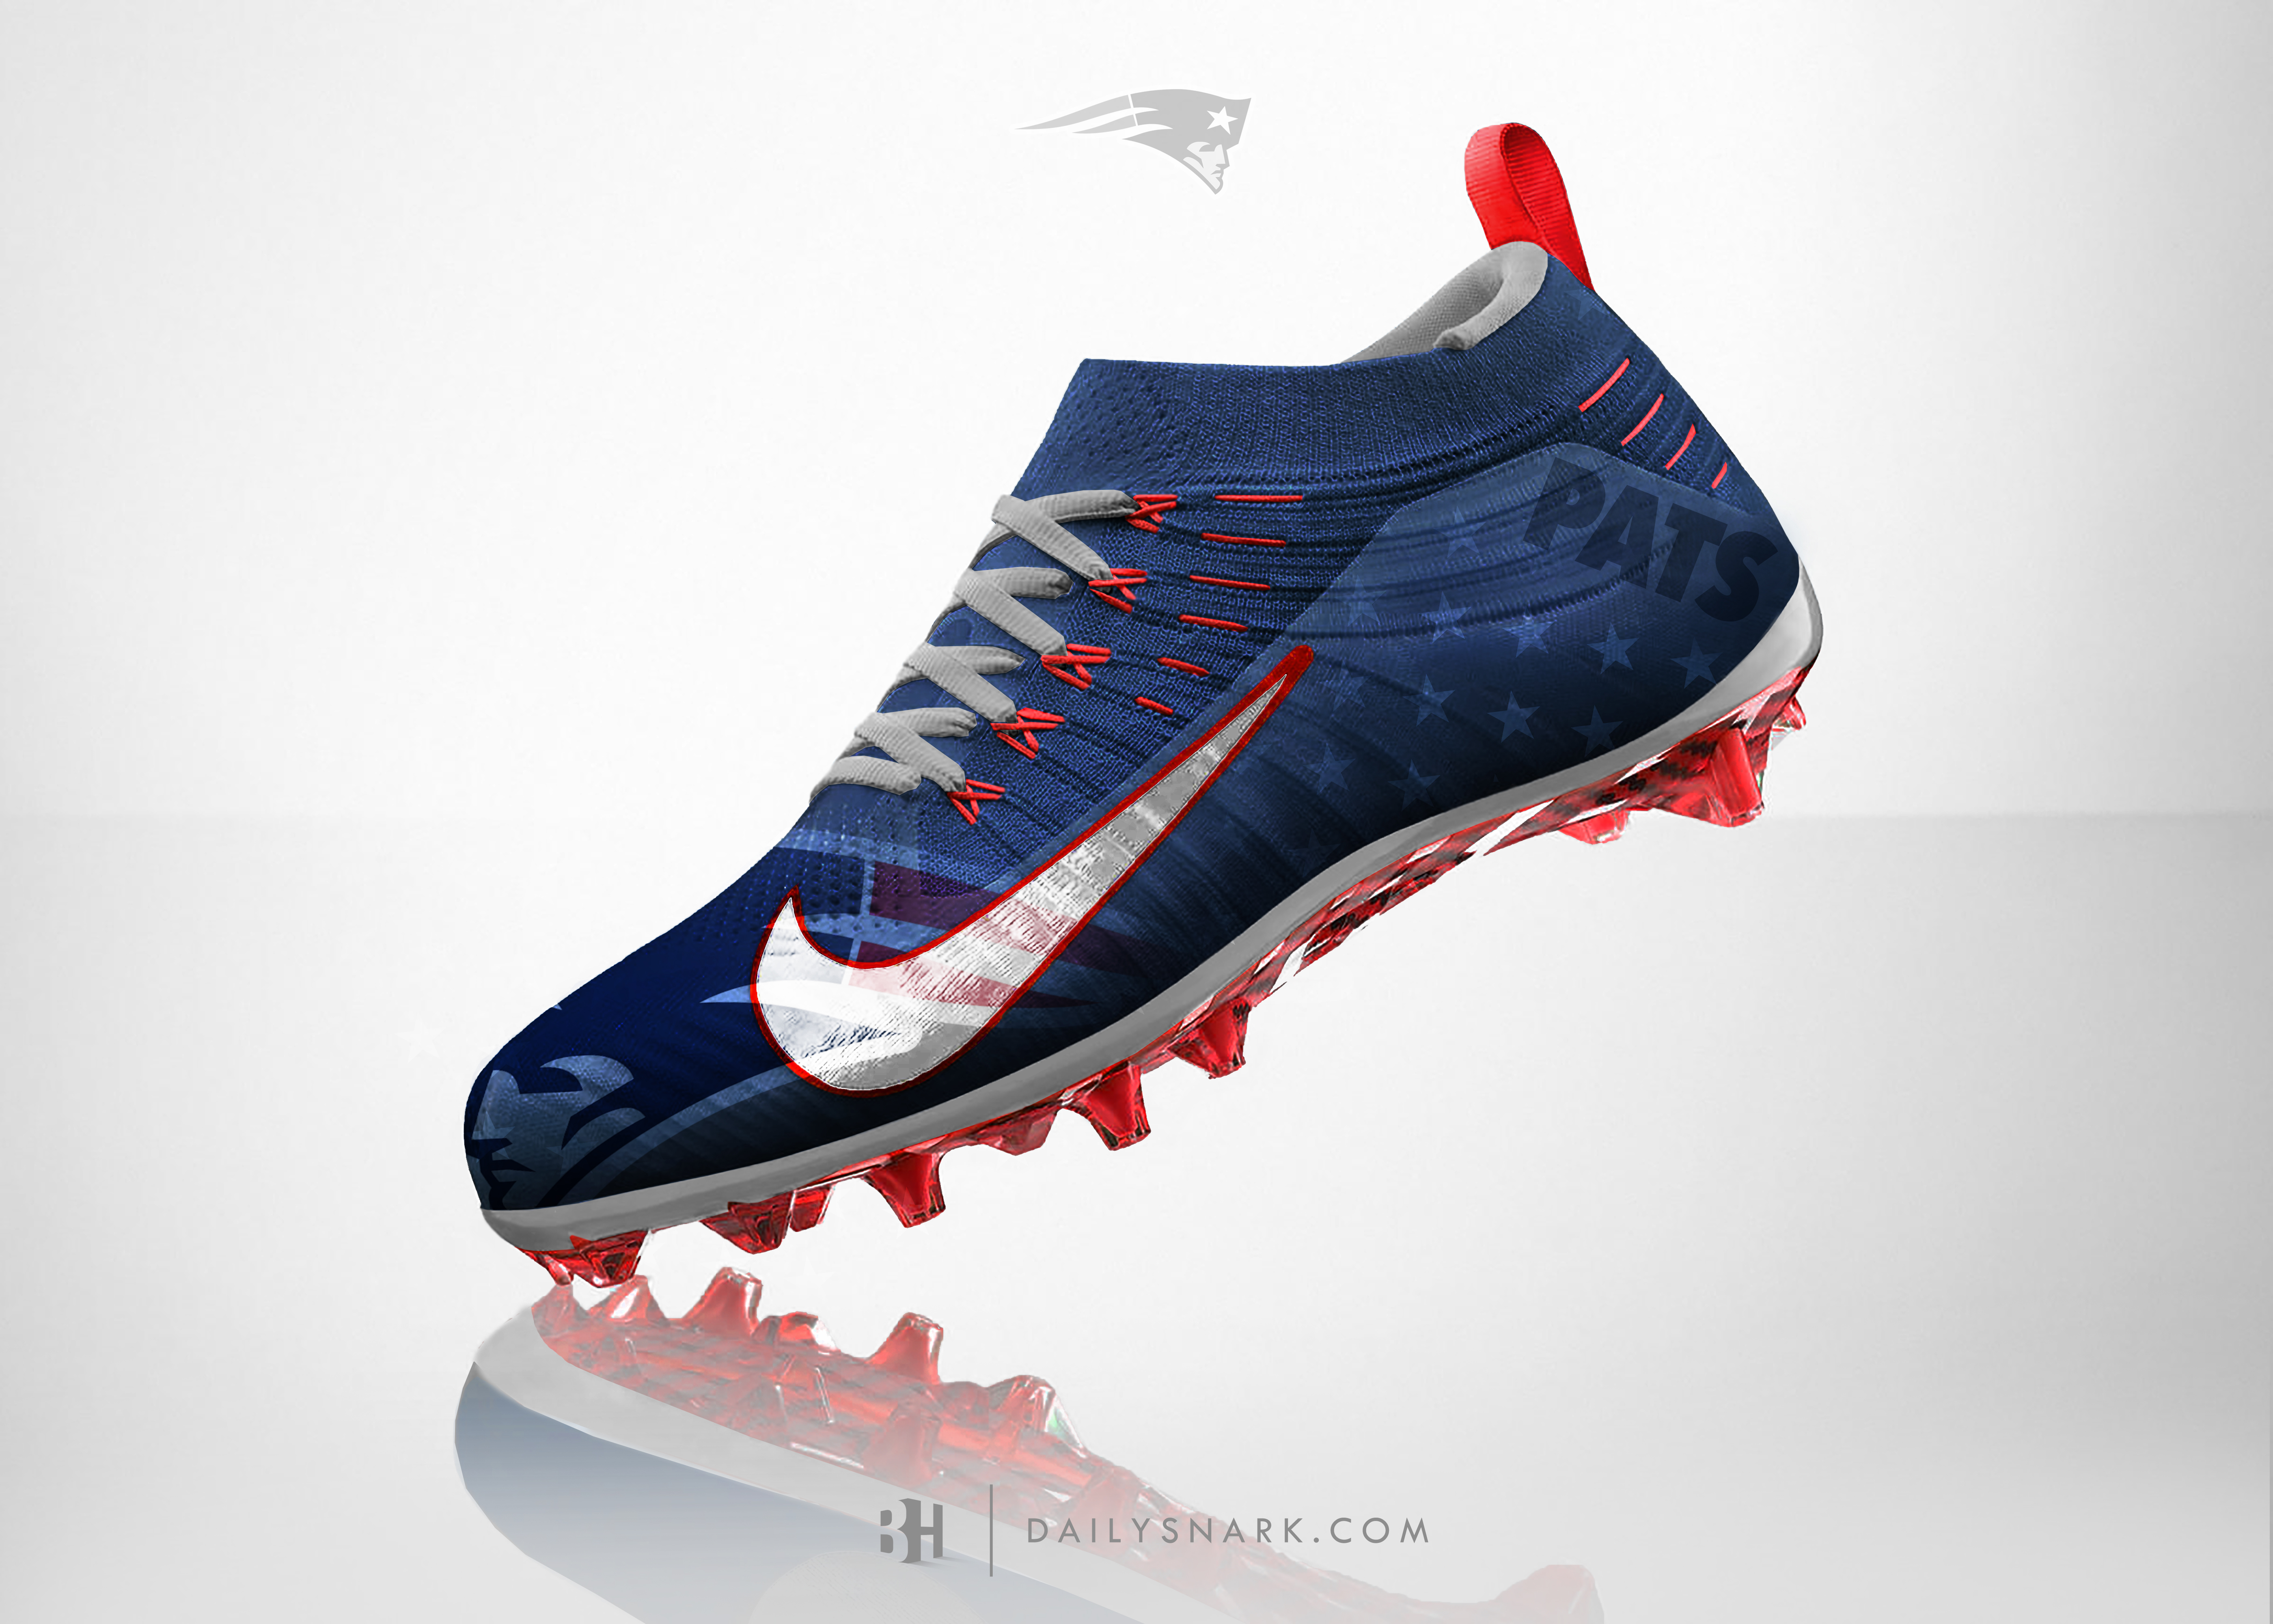 Designer Creates Awesome Custom Cleat Designs For All 32 NFL Teams